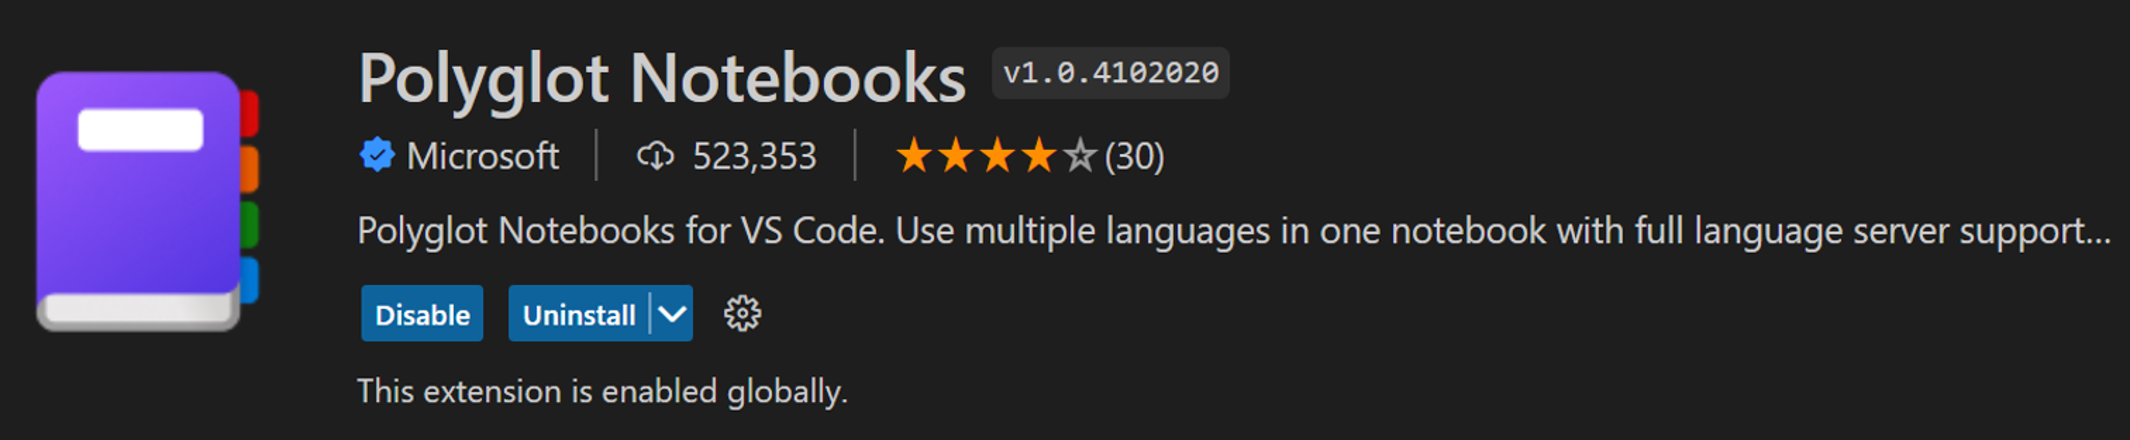 We are excited to announce that Polyglot Notebooks, Visual Studio Code’s multi-language notebook extension, is now generally available in the VS